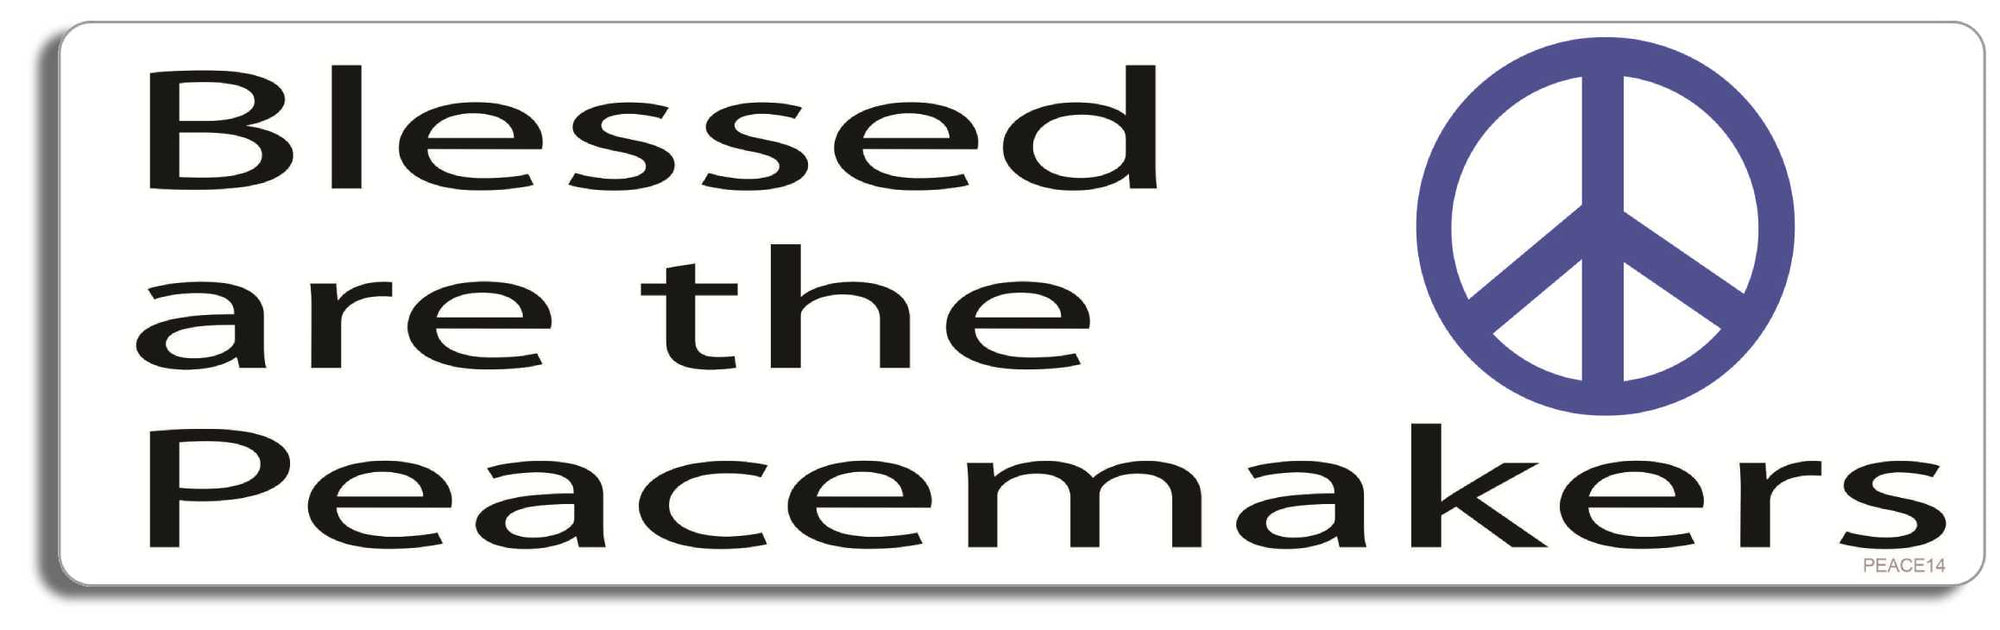 Blessed are the Peacemakers - 3" x 10" Bumper Sticker--Car Magnet- -  Decal Bumper Sticker-peace Bumper Sticker Car Magnet Blessed are the Peacemakers-  Decal for carsliberal, peace, political